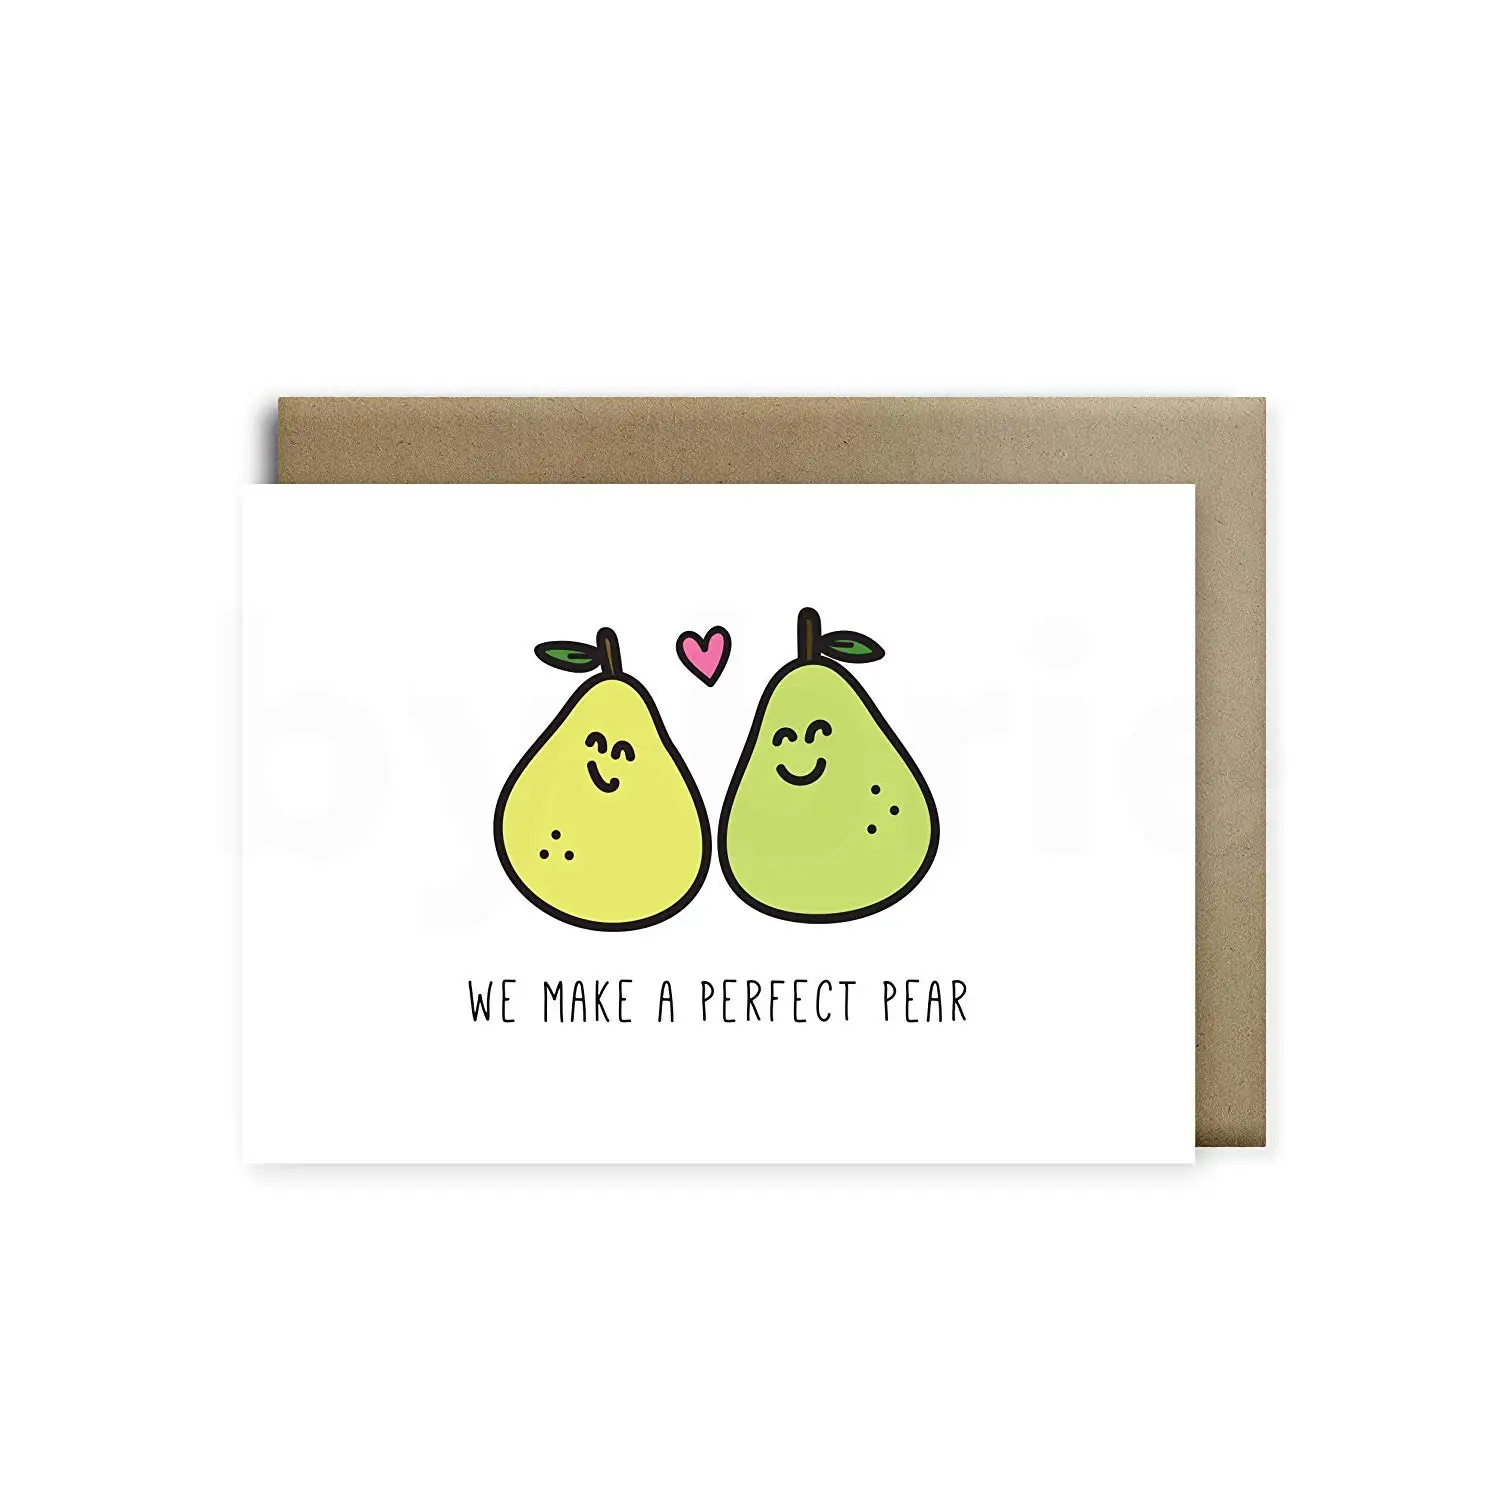 Cheap Anniversary Card Sayings Find Anniversary Card Sayings Deals On Line At Alibaba Com